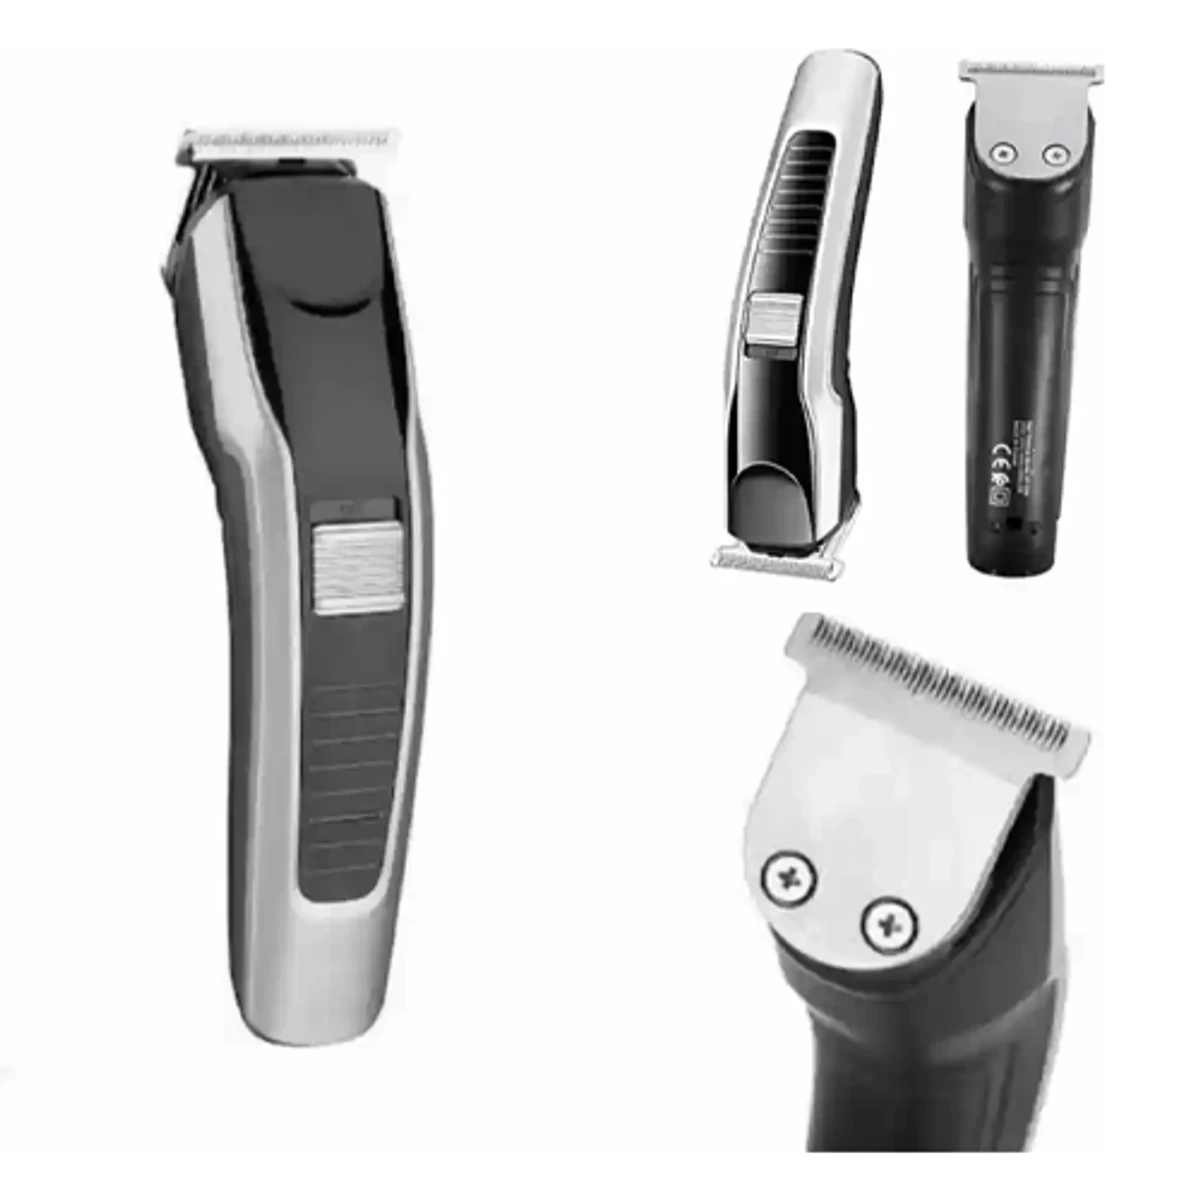 HTC AT-538 Rechargeable Hair and Beard Trimmer For Men